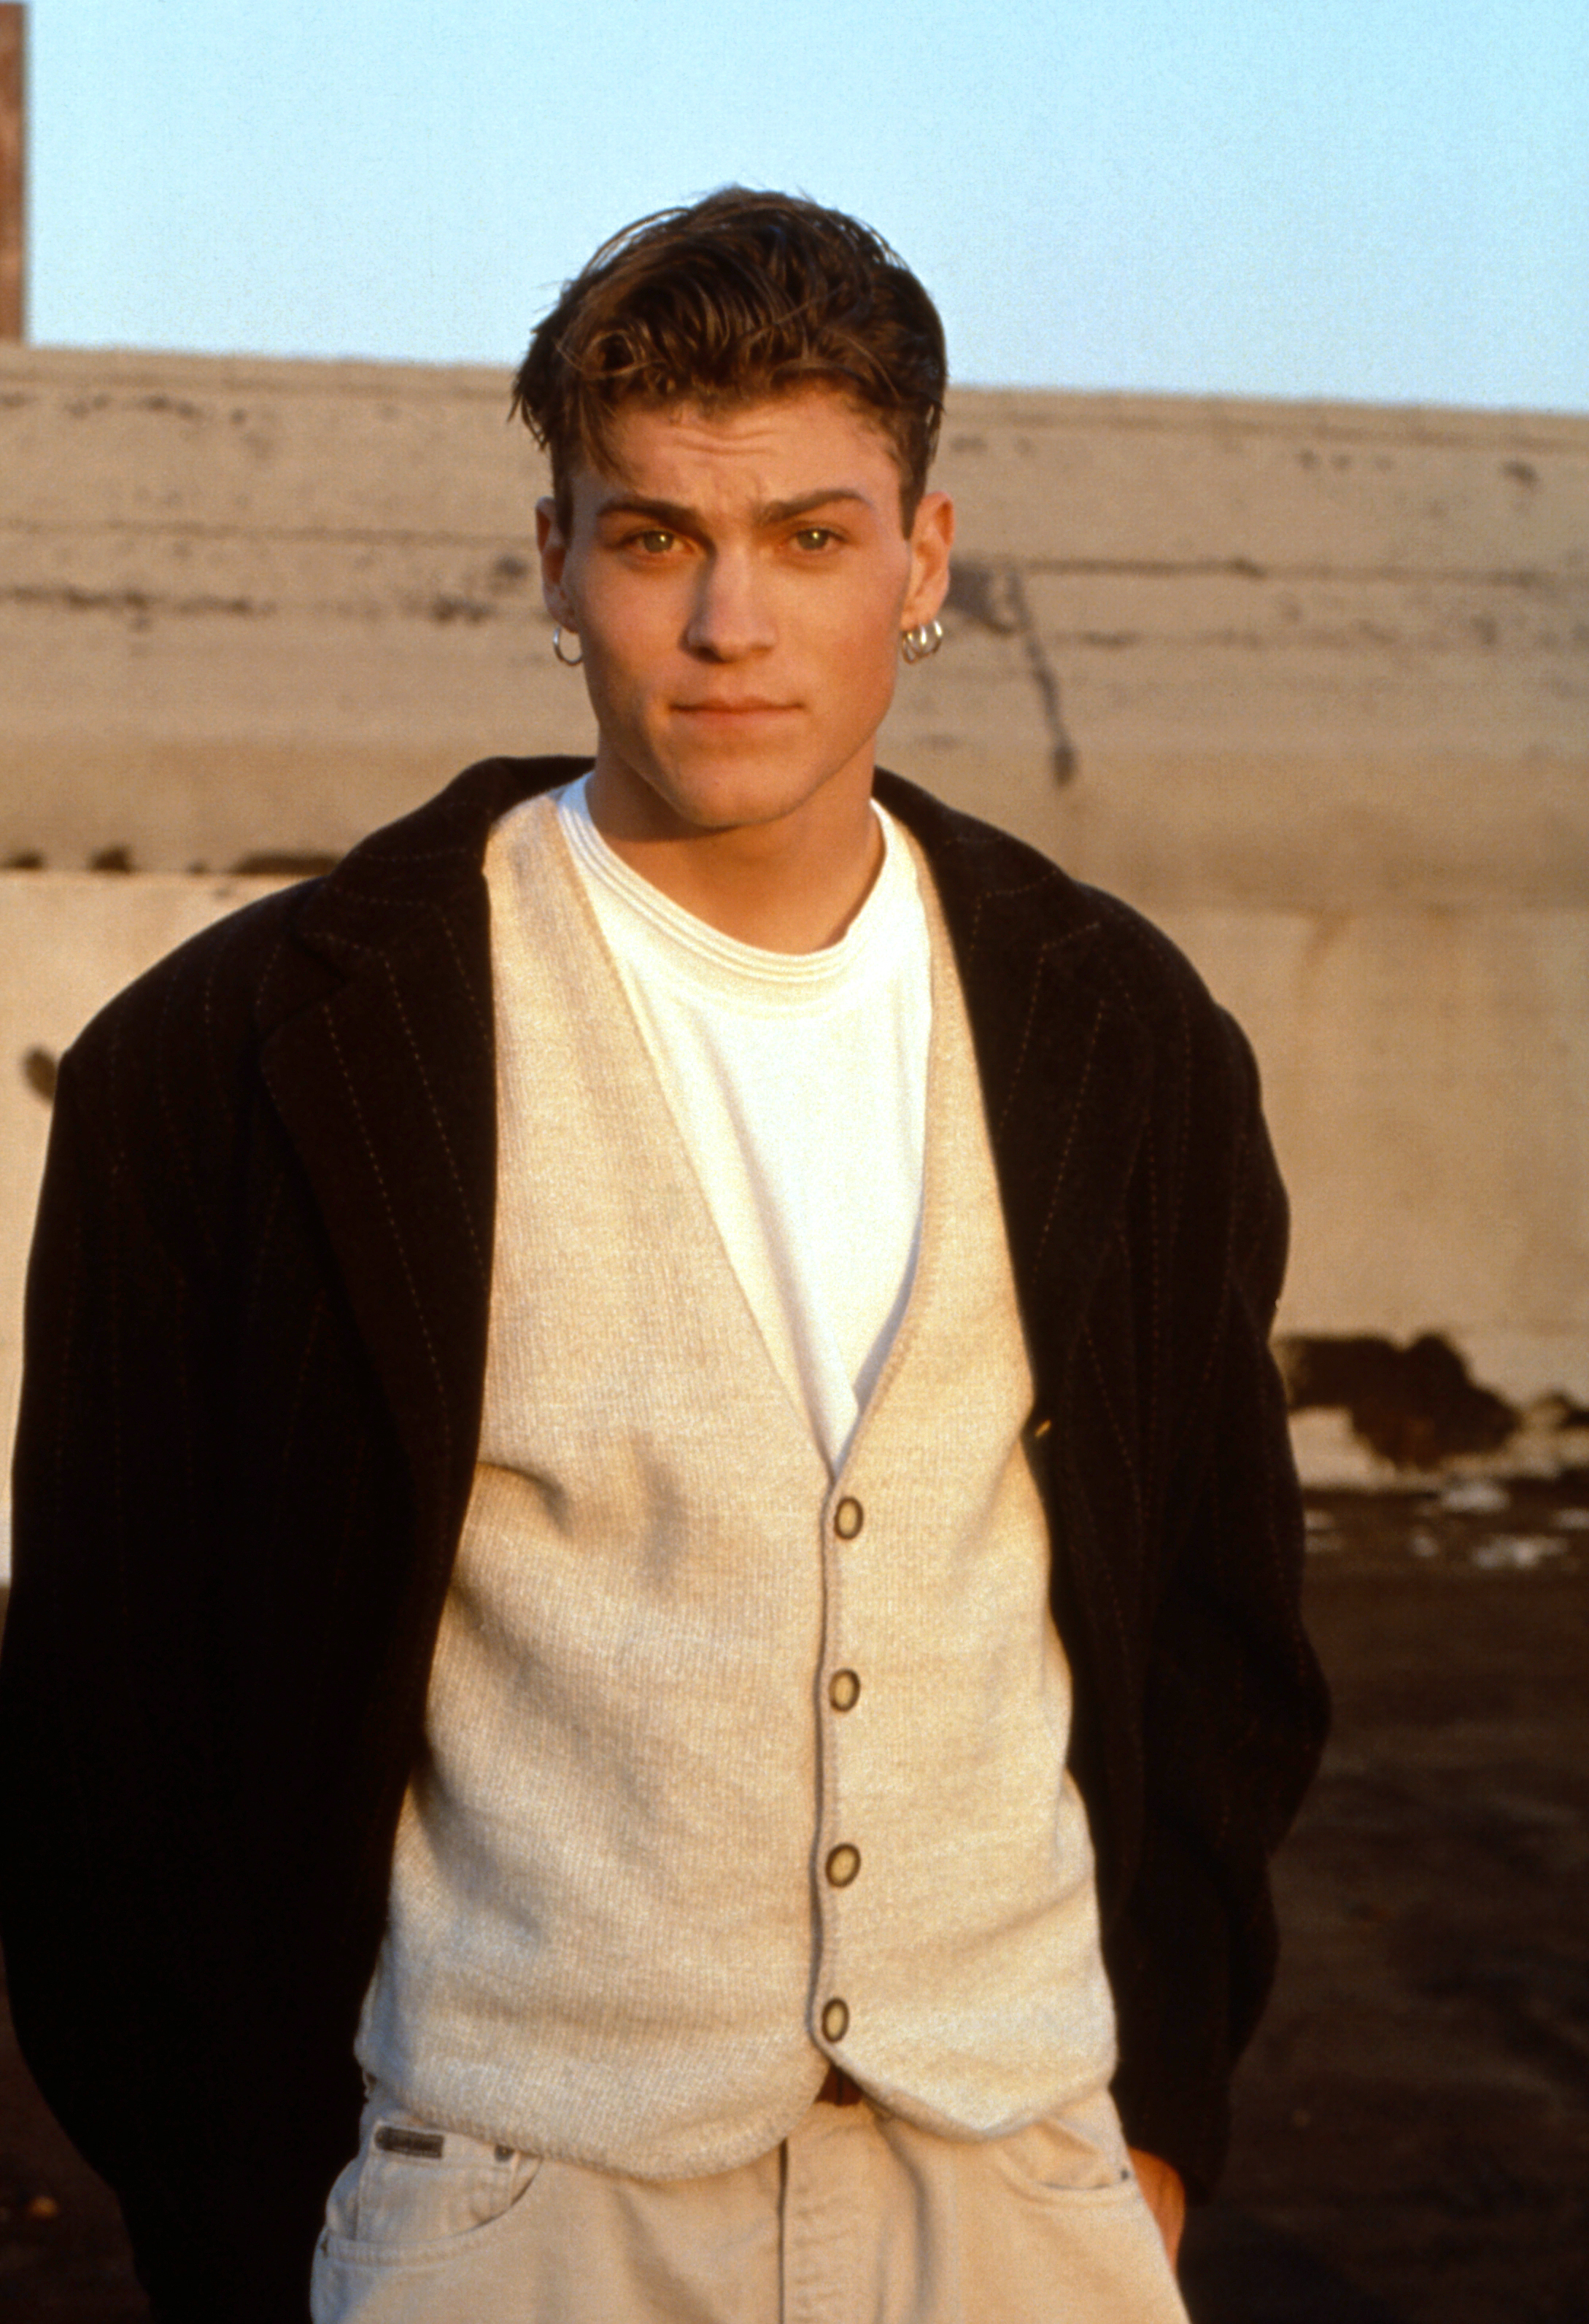 Actor Brian Austin Green during a portrait session around 1997 in Los Angeles, California | Source: Getty Images